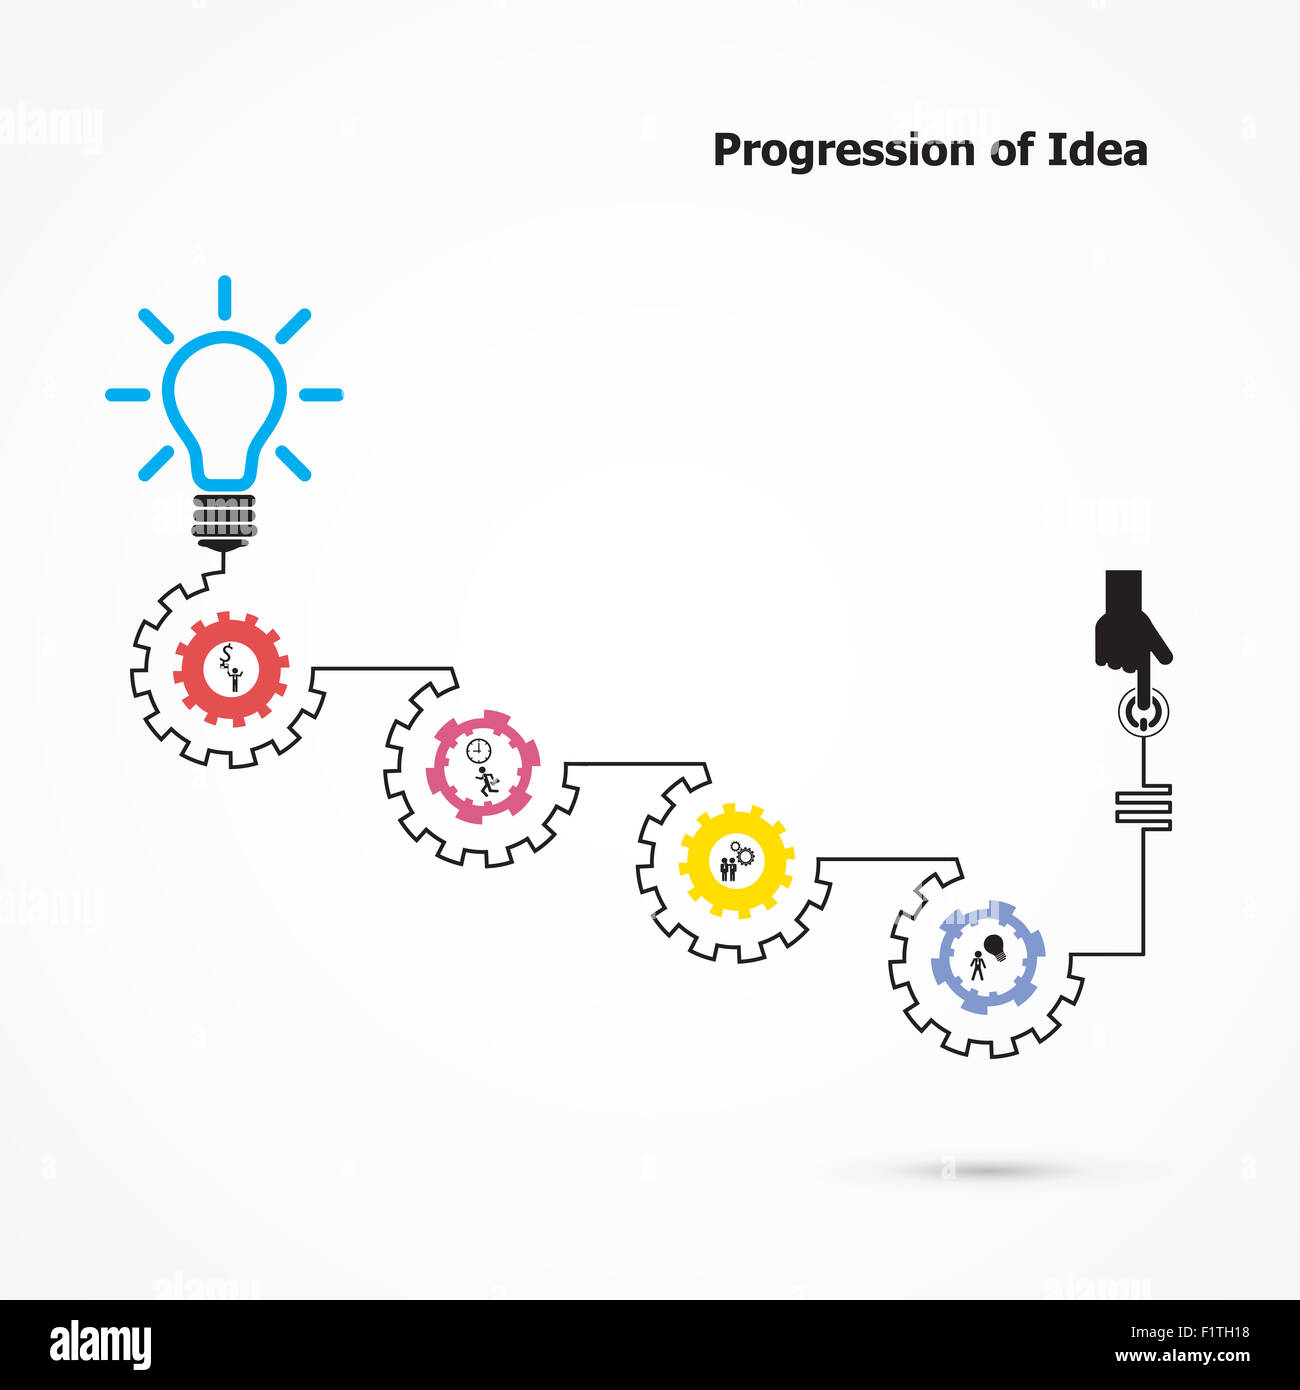 Creative light bulb symbol with linear of gear shape. Progression of idea concept. Business, education and industrial idea Stock Photo